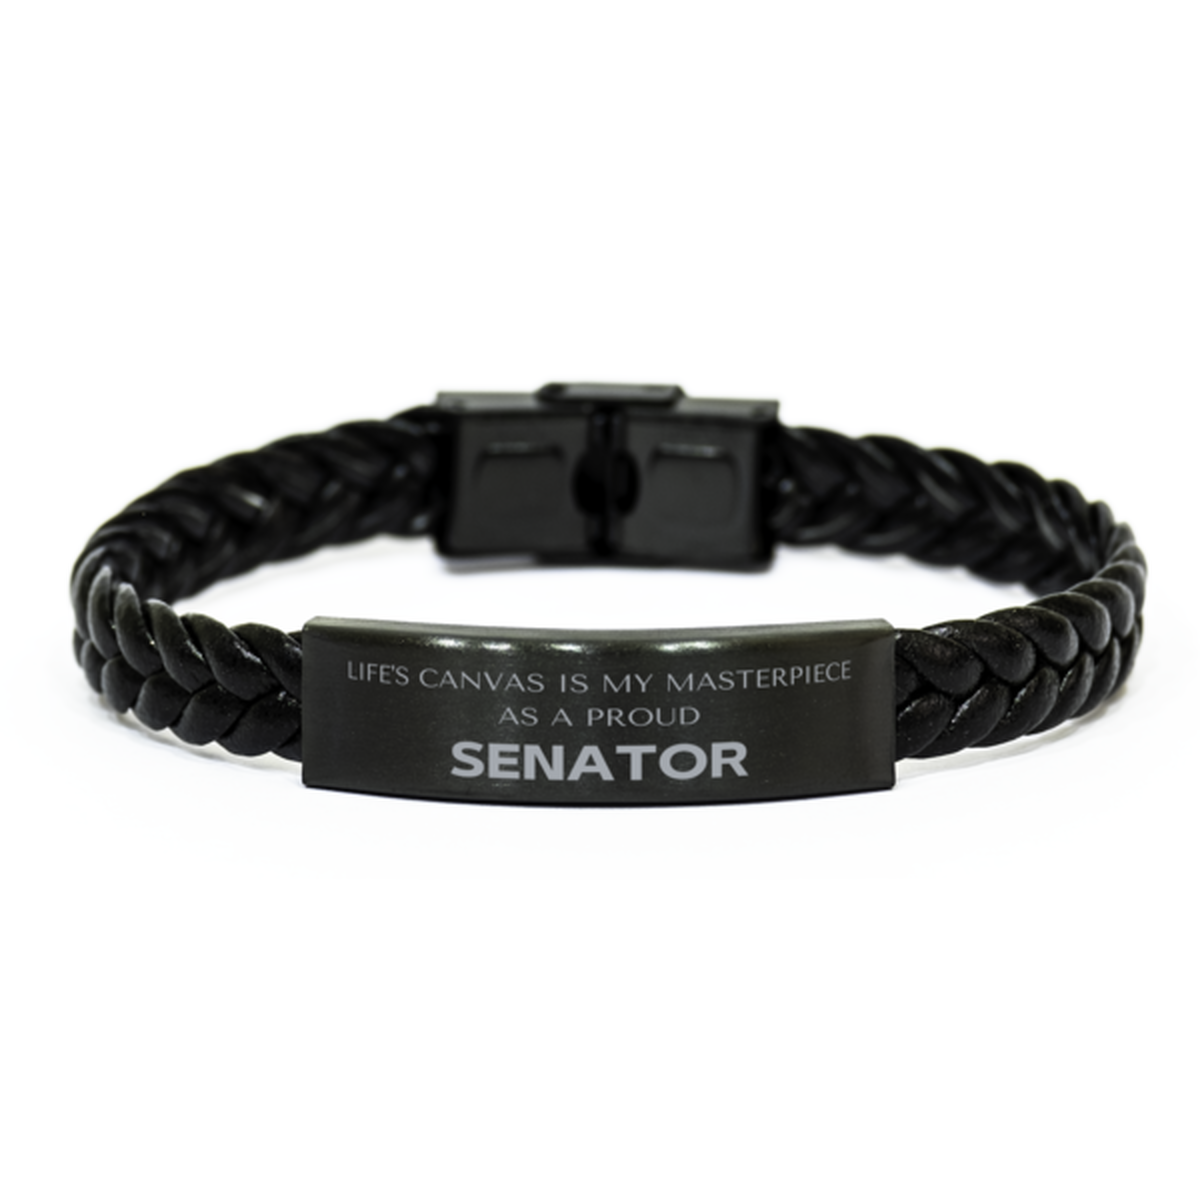 Proud Senator Gifts, Life's canvas is my masterpiece, Epic Birthday Christmas Unique Braided Leather Bracelet For Senator, Coworkers, Men, Women, Friends